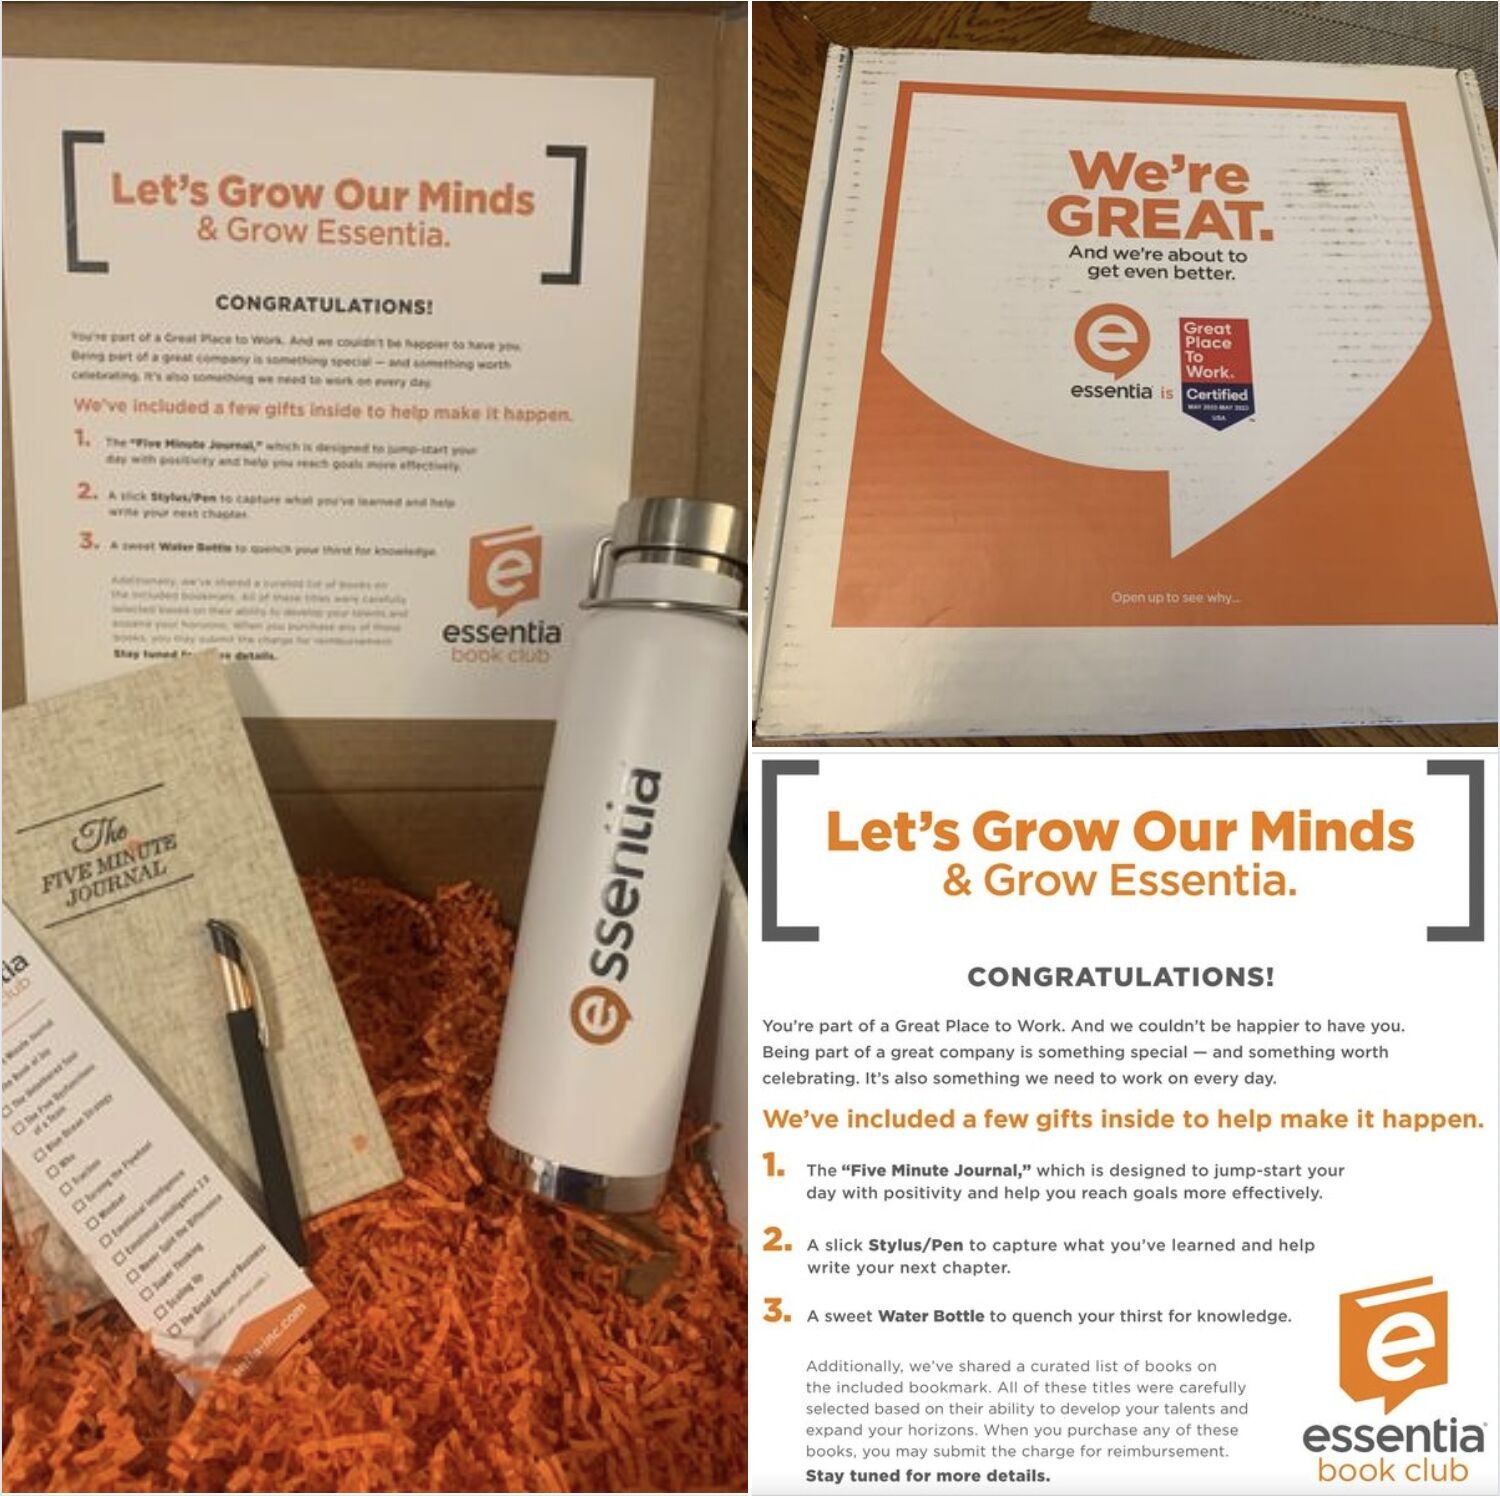 Essentia launched a book club by sending a swag box to all team members.